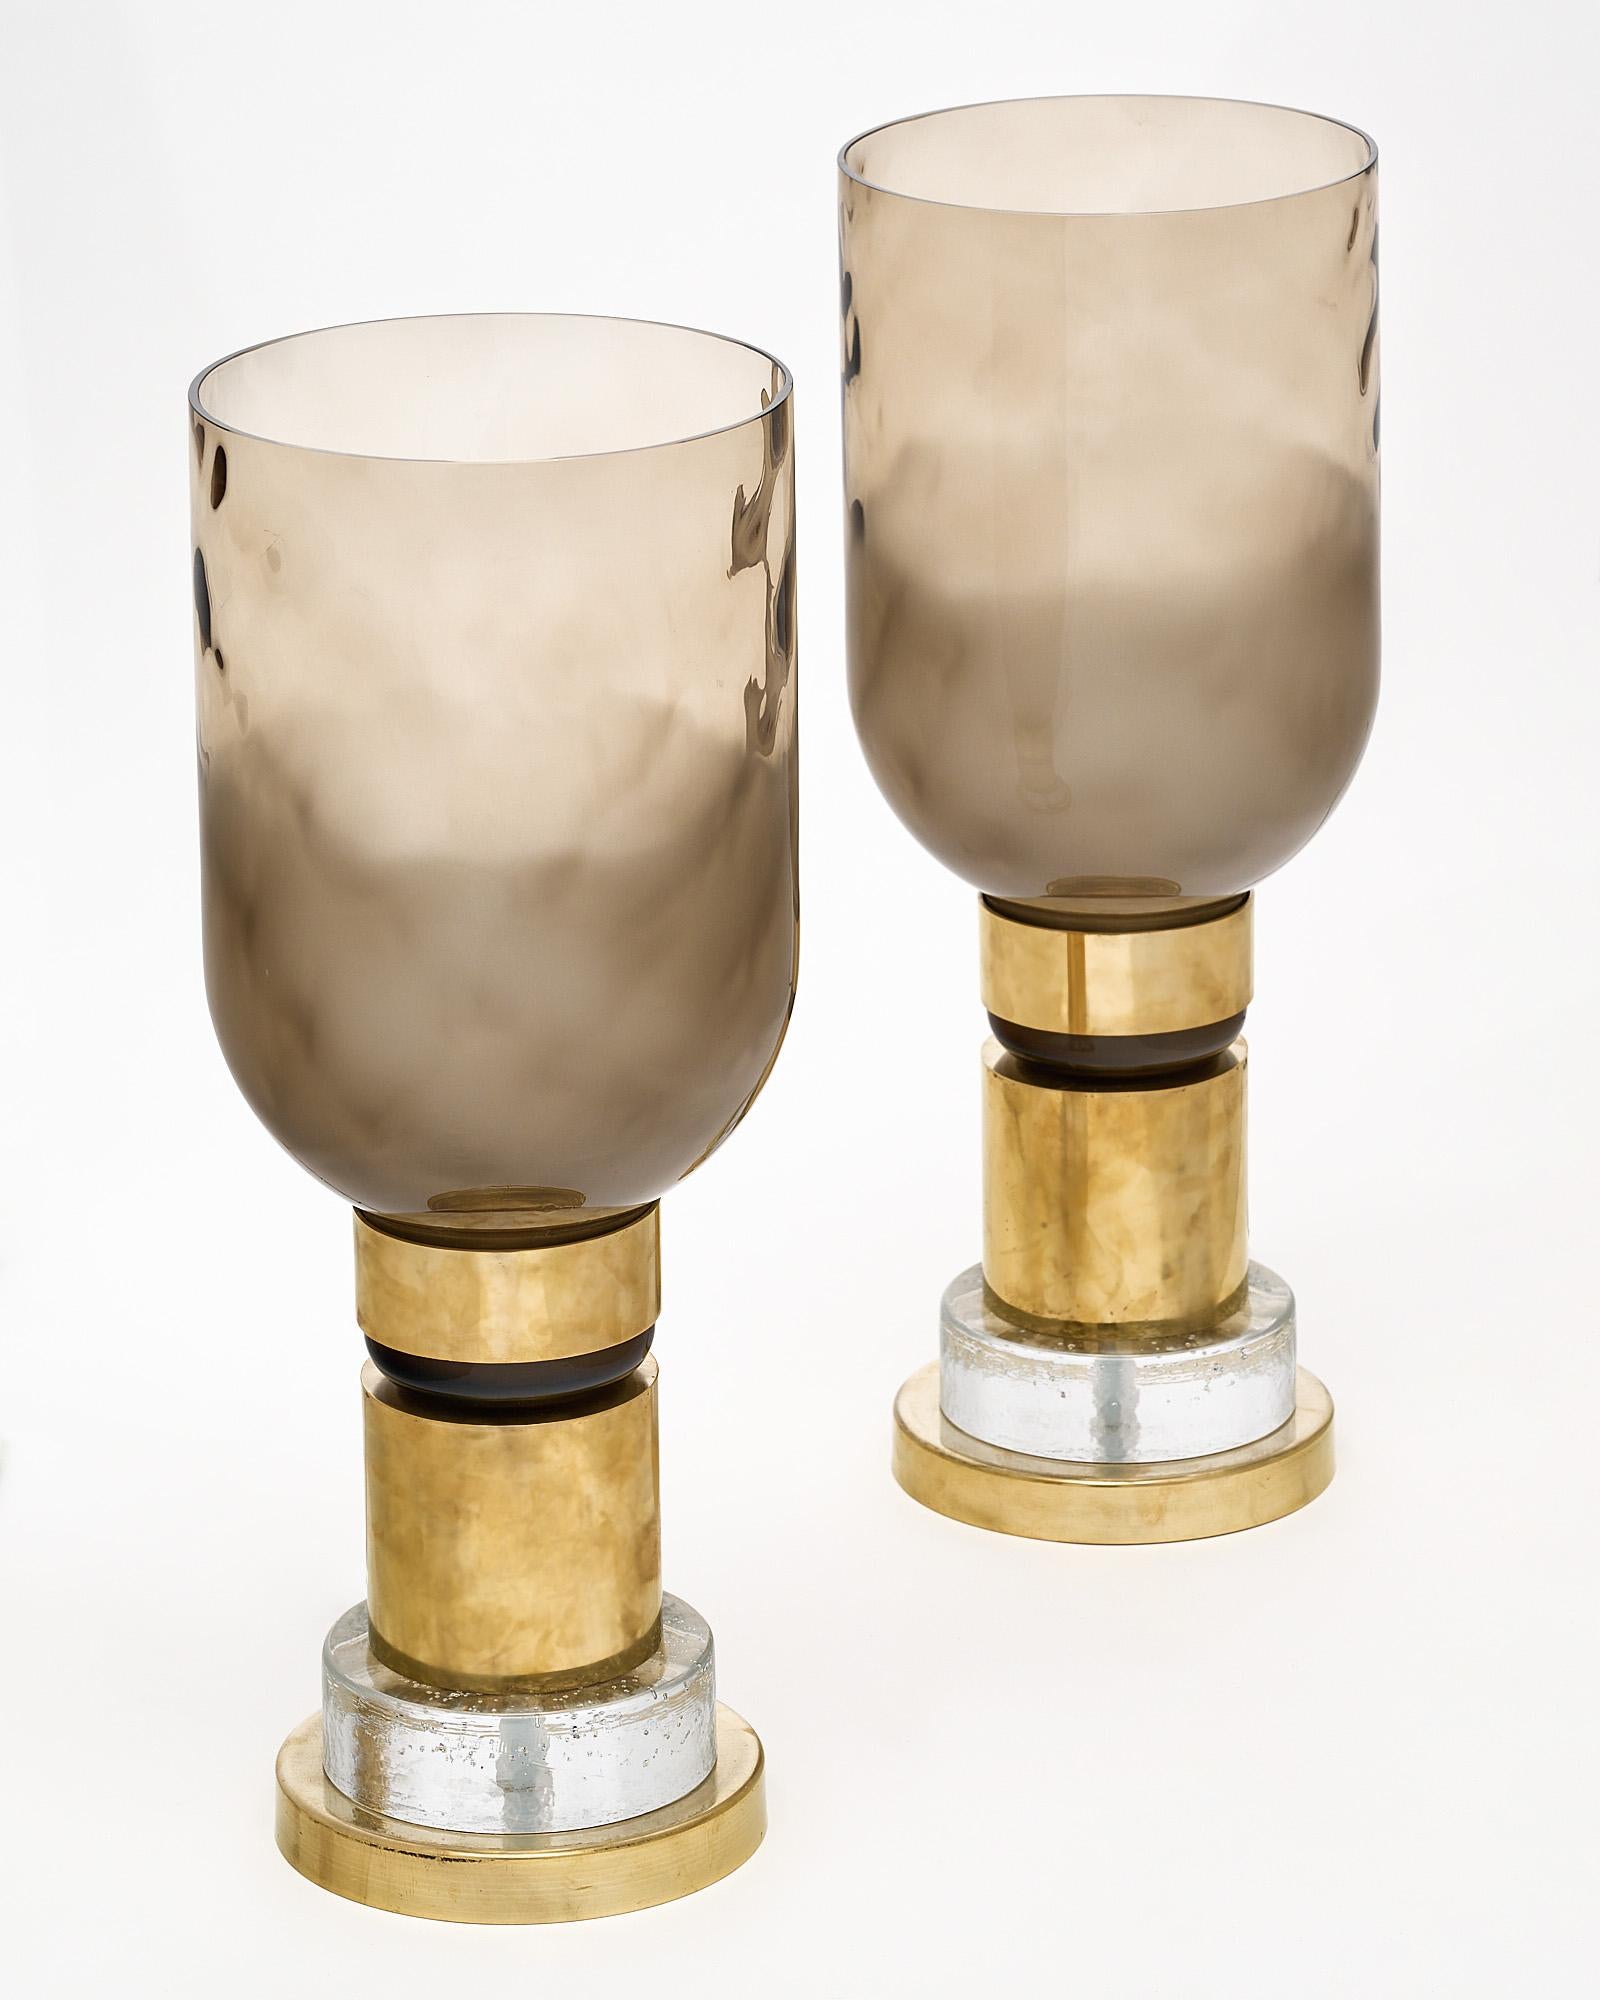 Pair of lamps, of Murano glass, crafted on the island of Murano next to Venice. The important lamps feature a smoked and textured shade in an organic “hammered” fashion, while the base boasts brass cylindrical components and clear textured glass in